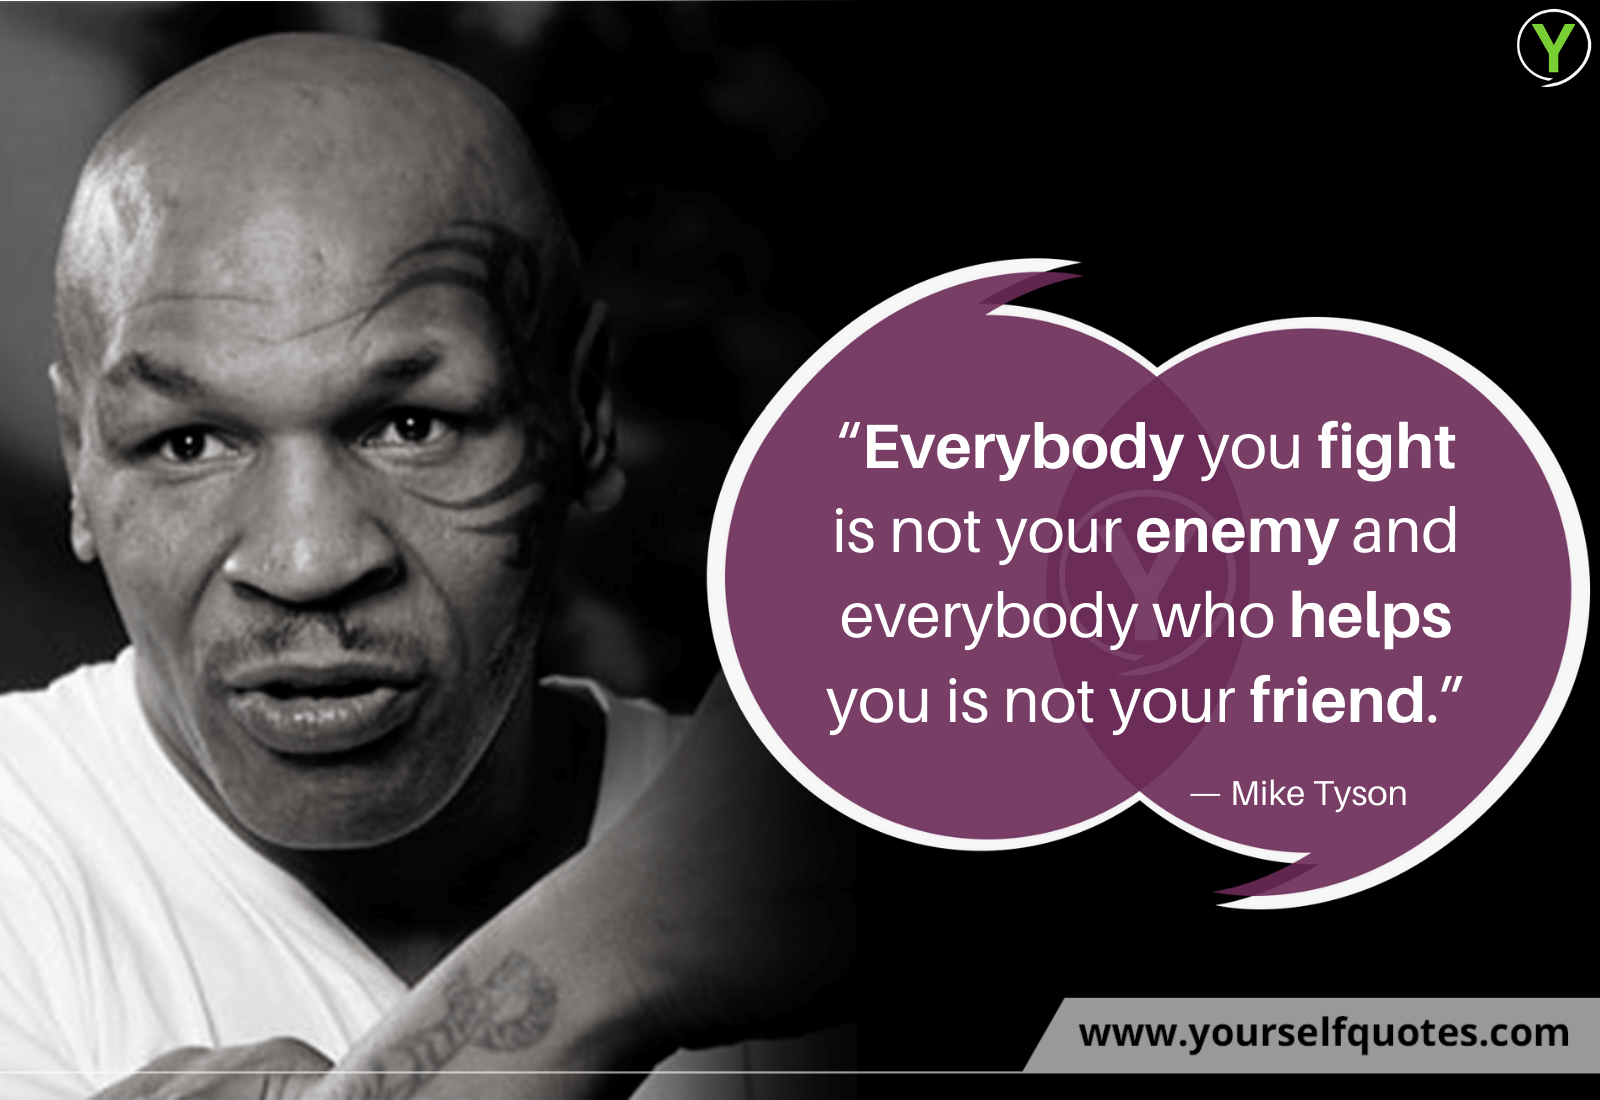 Motivational Mike Tyson Quotes Images